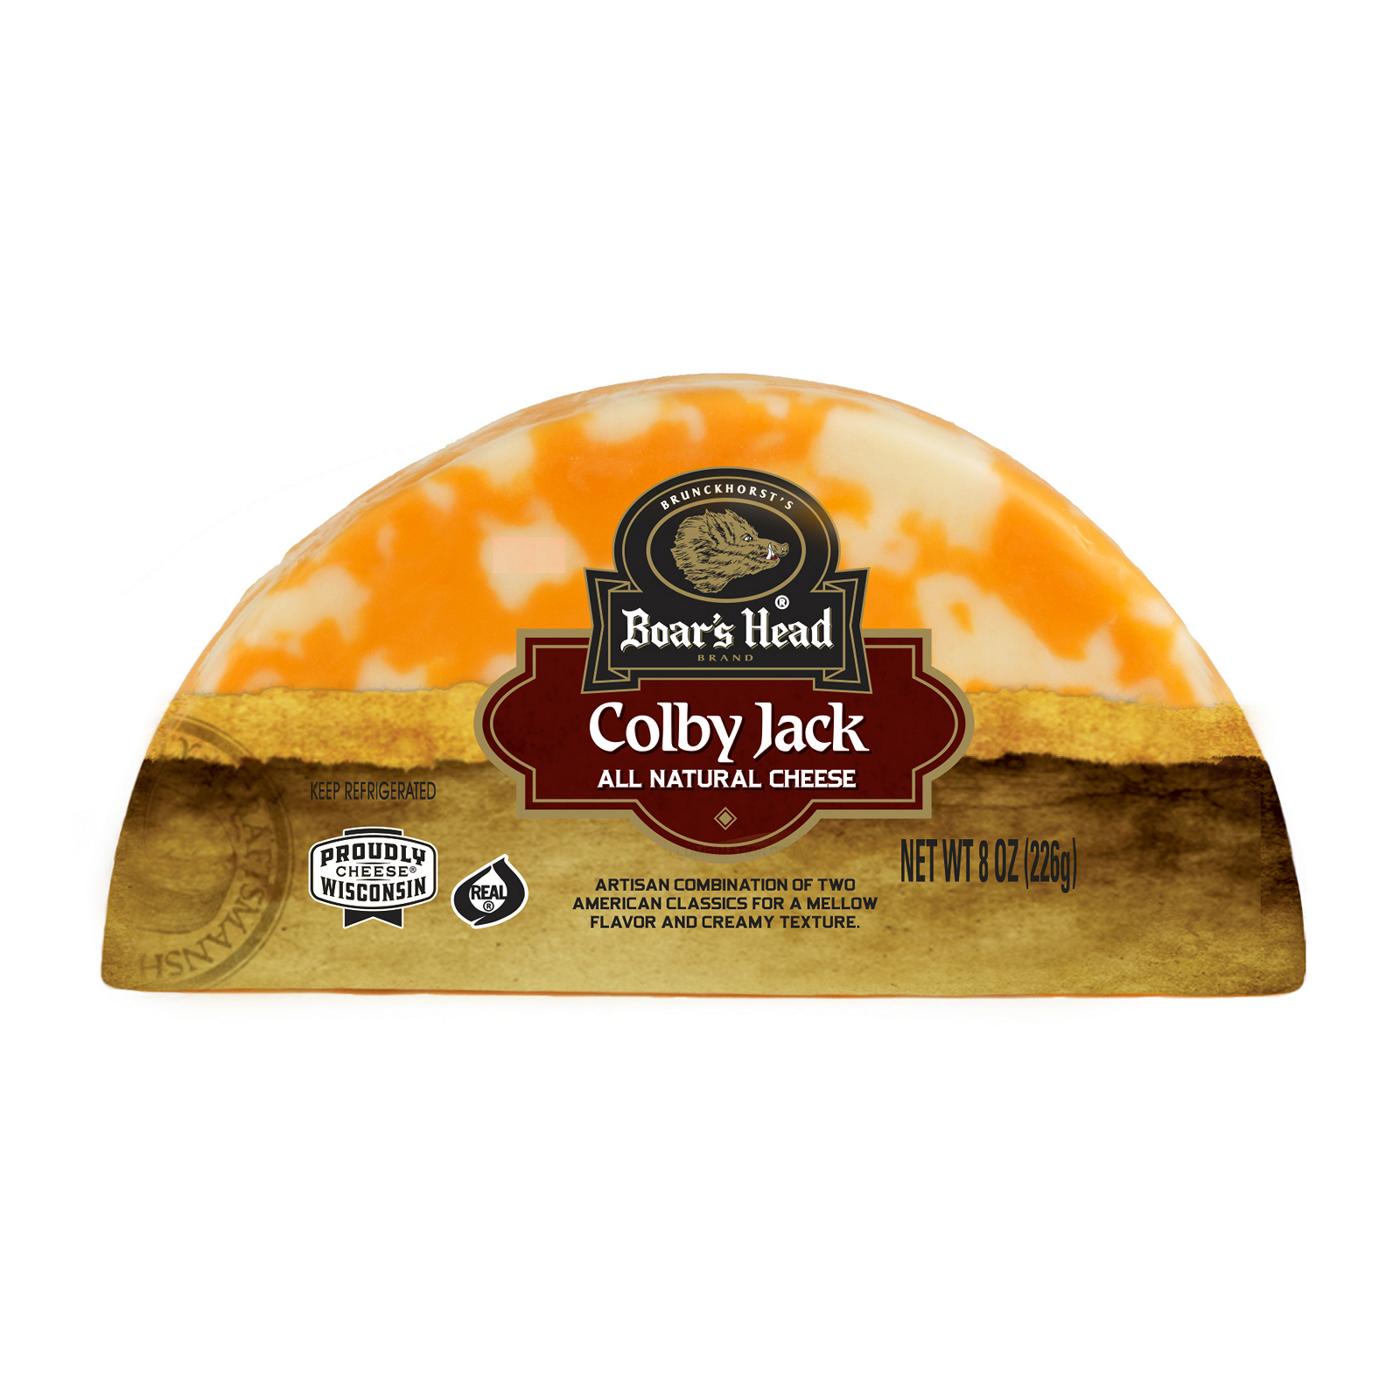 Boar's Head Colby Jack Cheese; image 1 of 2